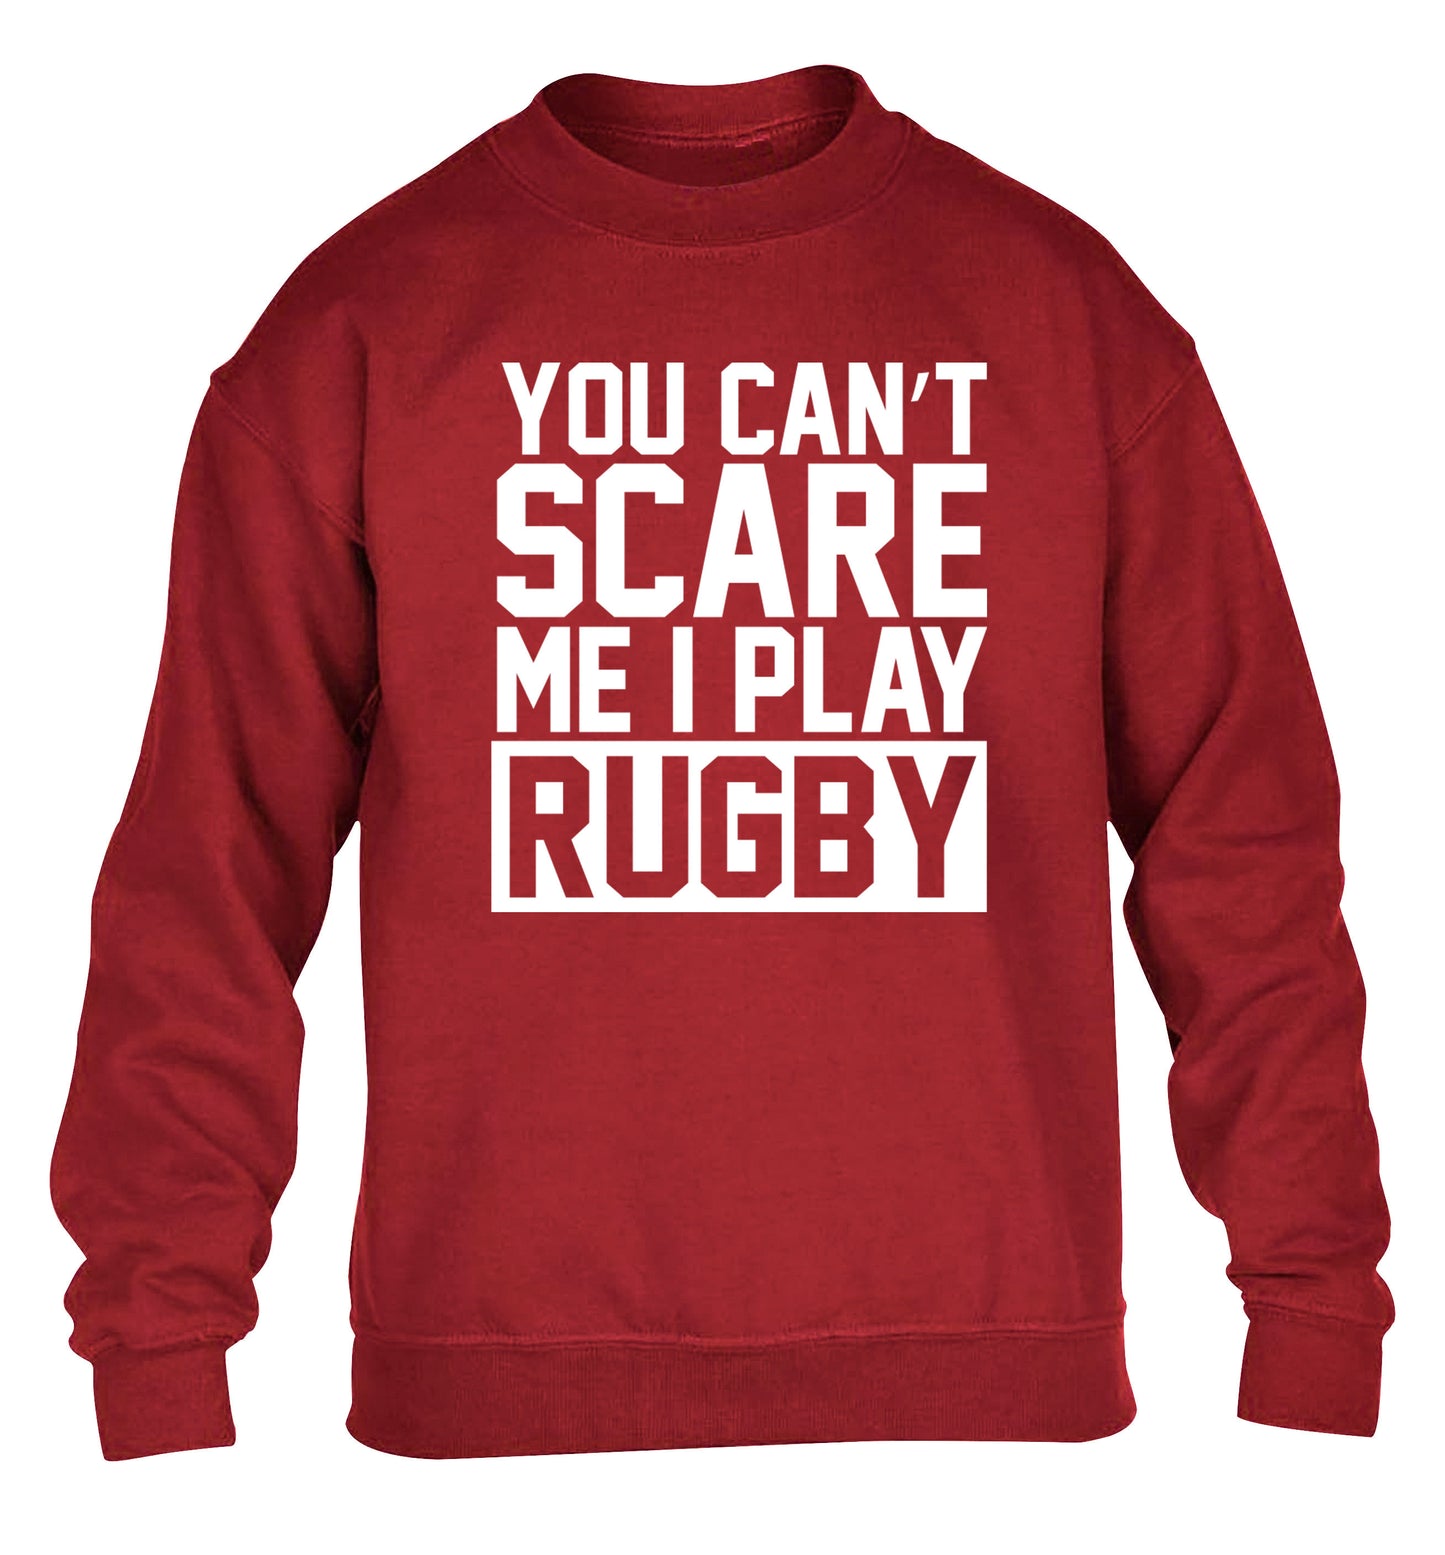 You can't scare me I play rugby children's grey sweater 12-14 Years